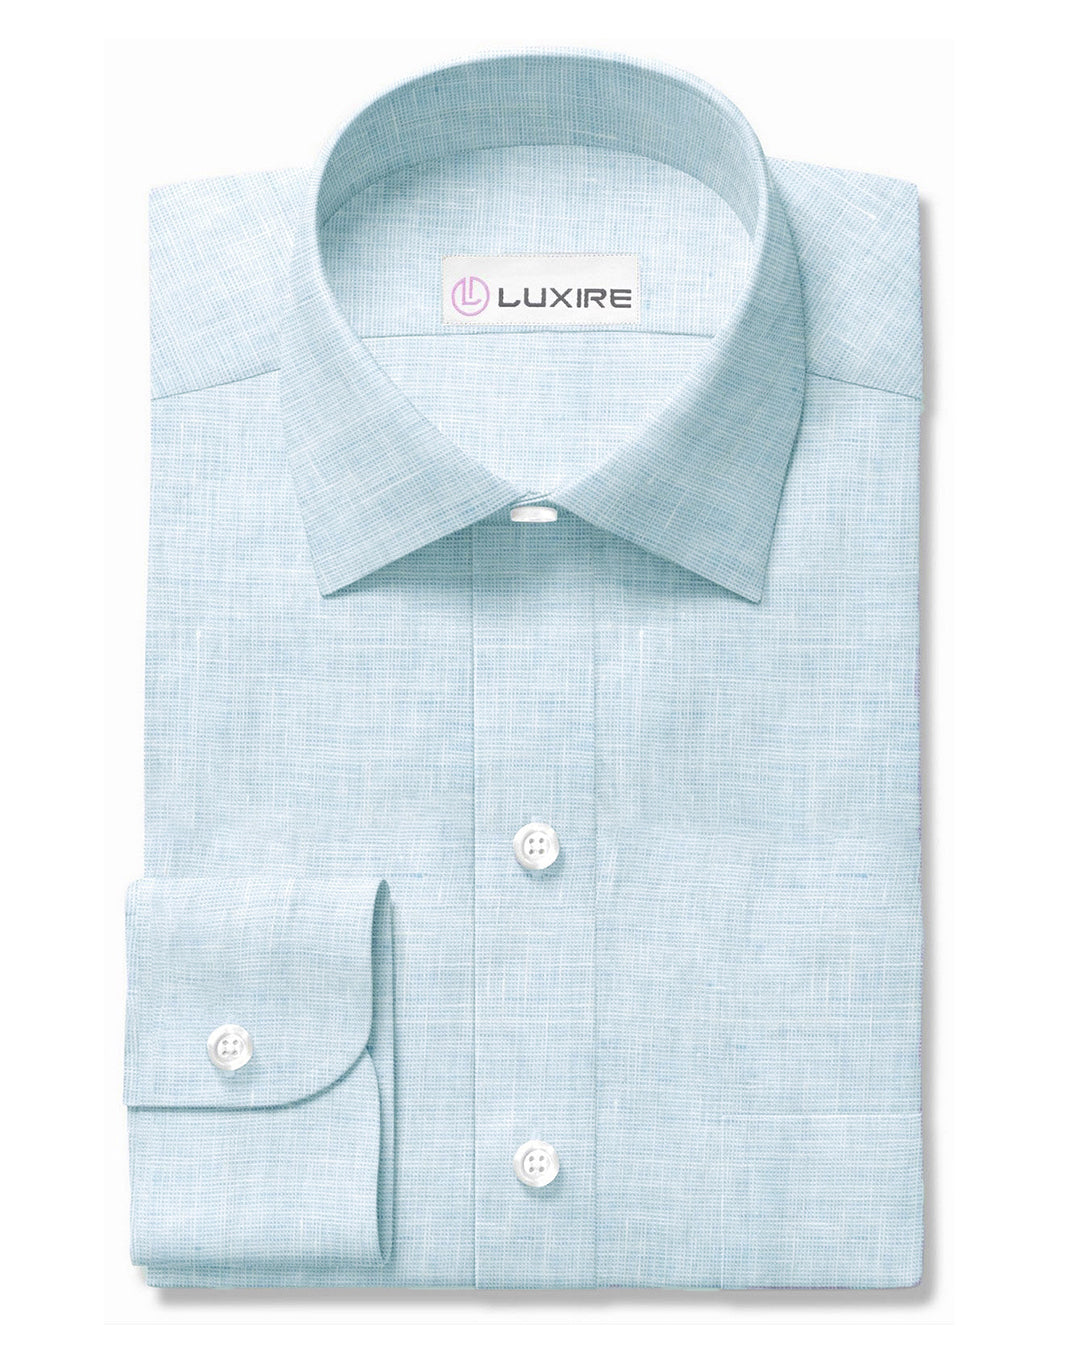 Front view of custom linen shirt for men in pale blue